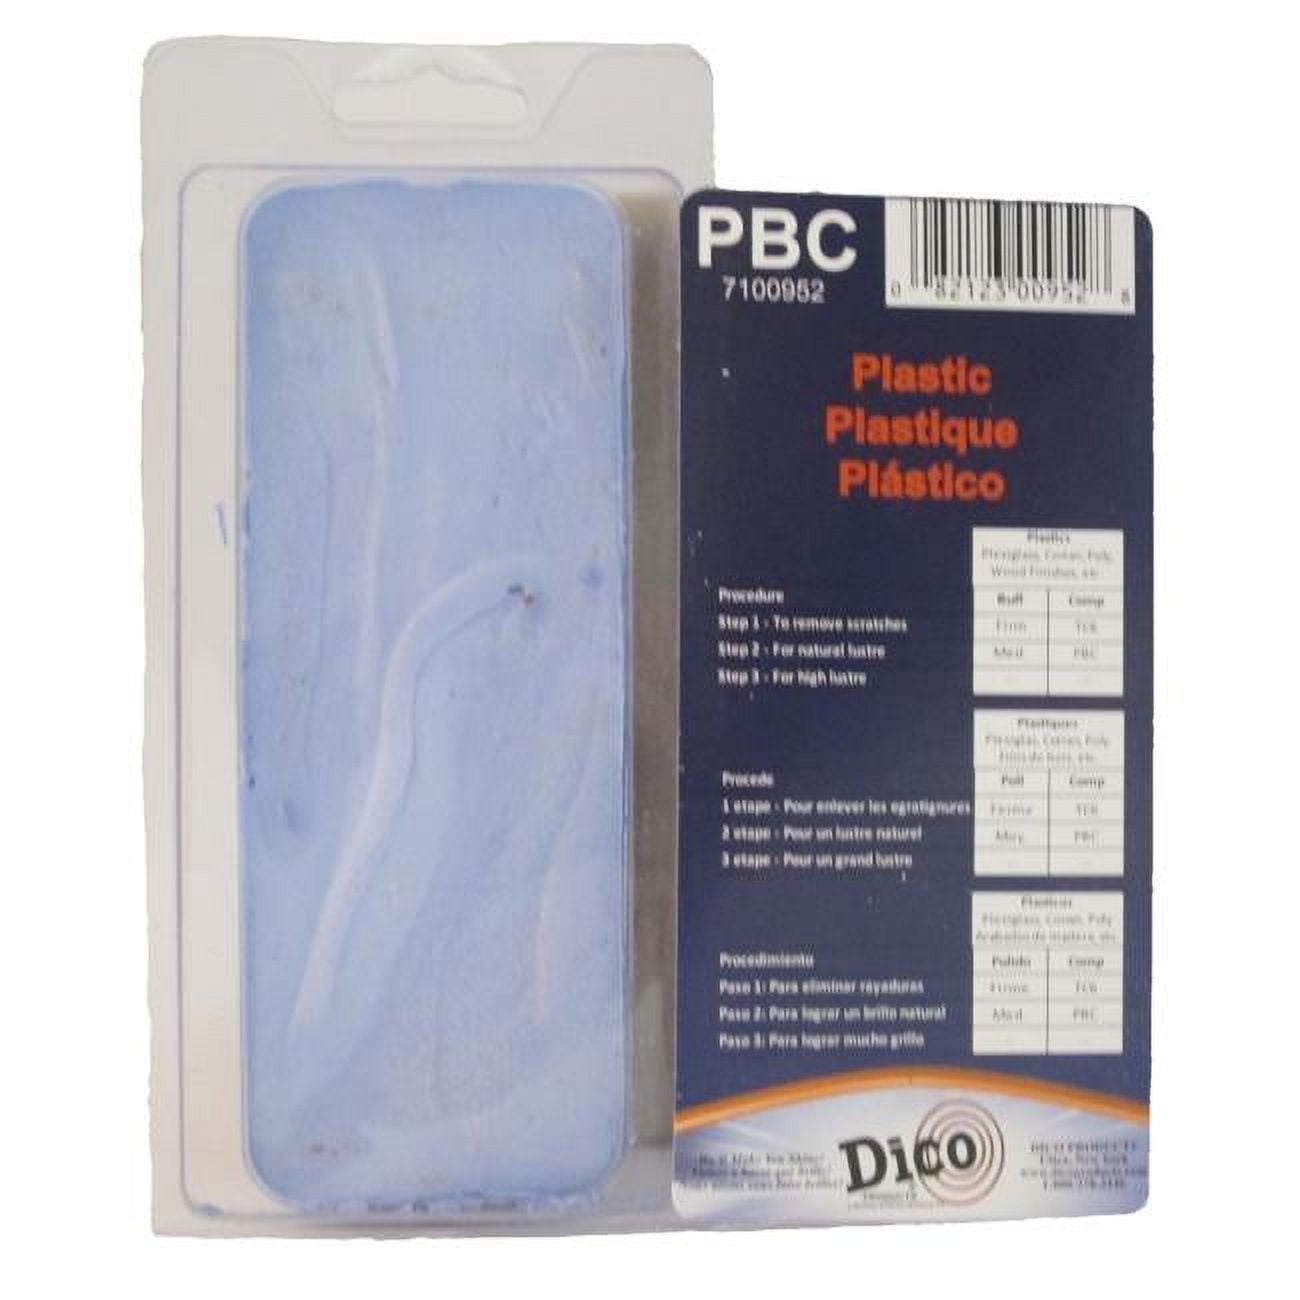 7100952 Plastic Buffing Compound For Use With Buffing Wheels, Blue - Brick